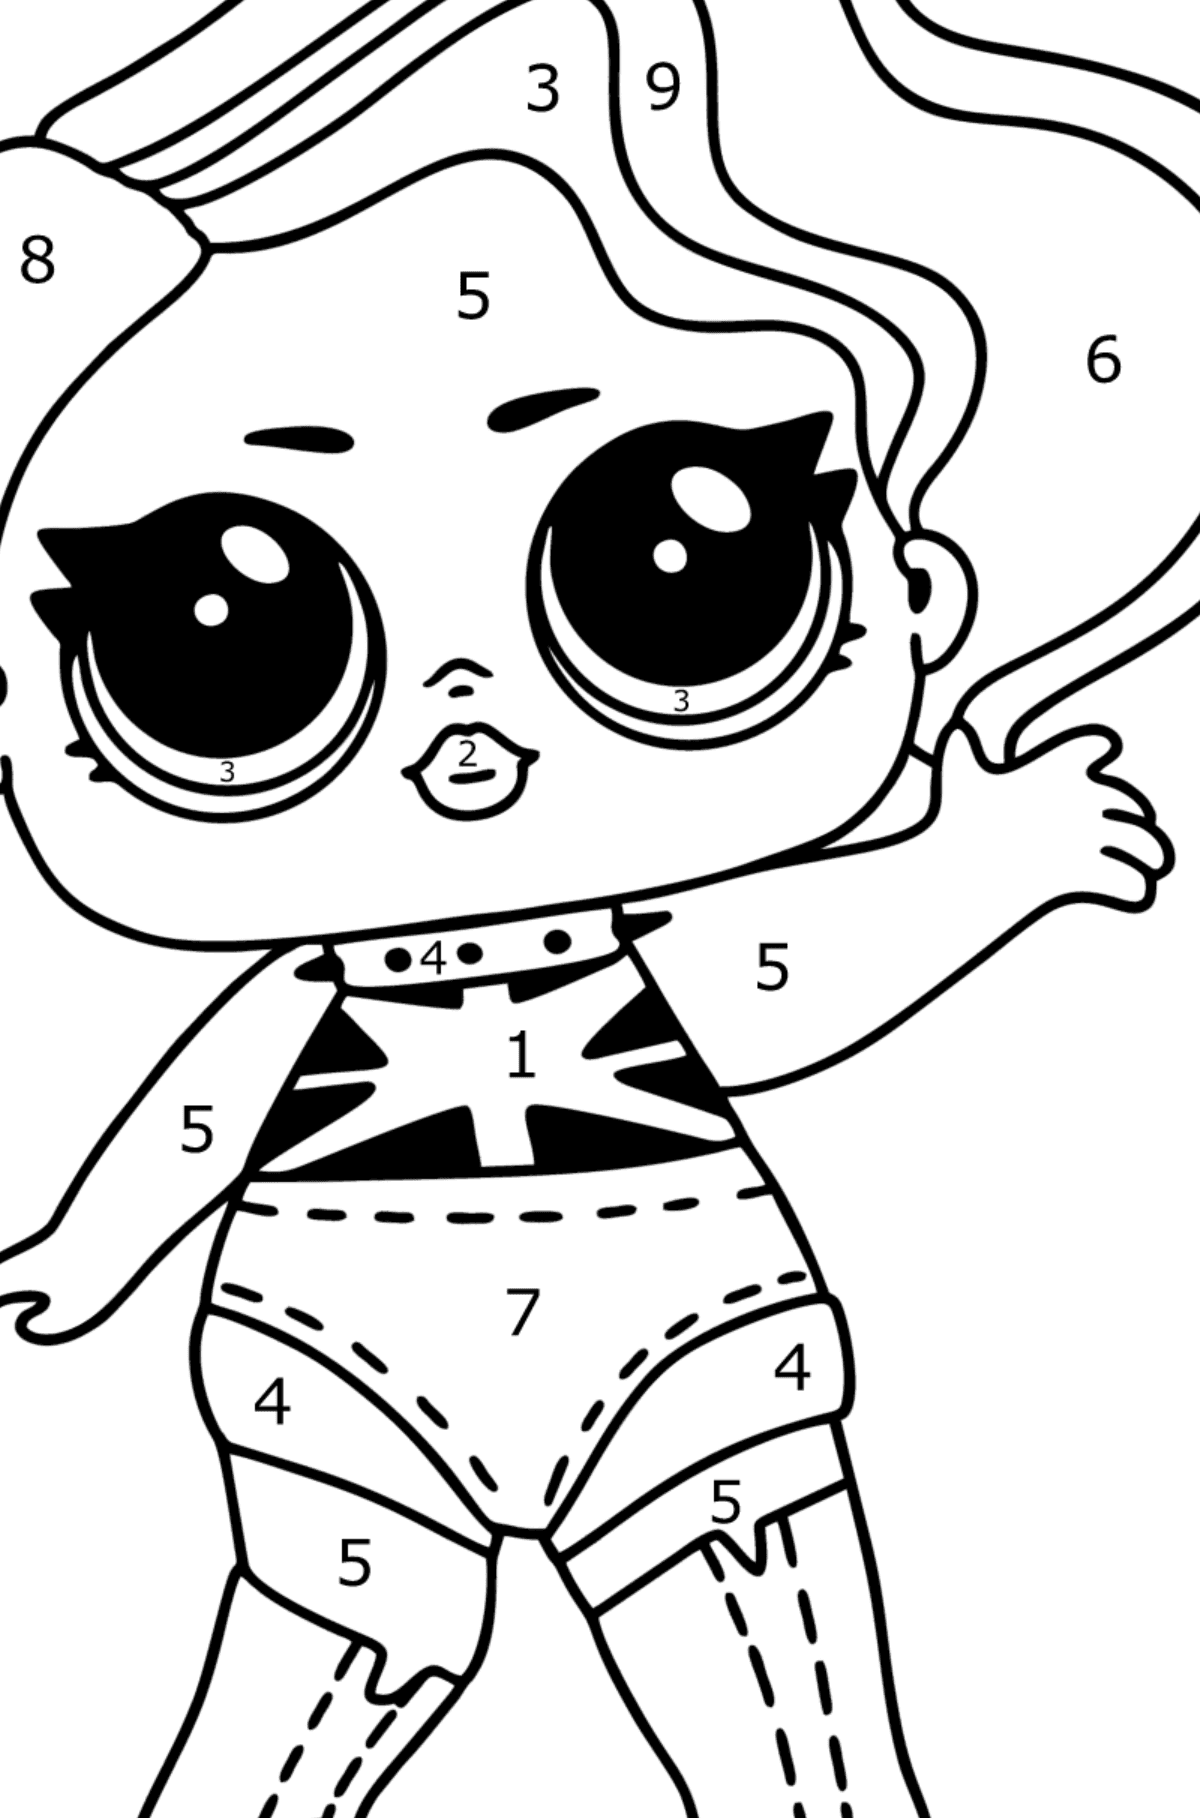 LOL Surprise Cheeky babe coloring page - Coloring by Numbers for Kids